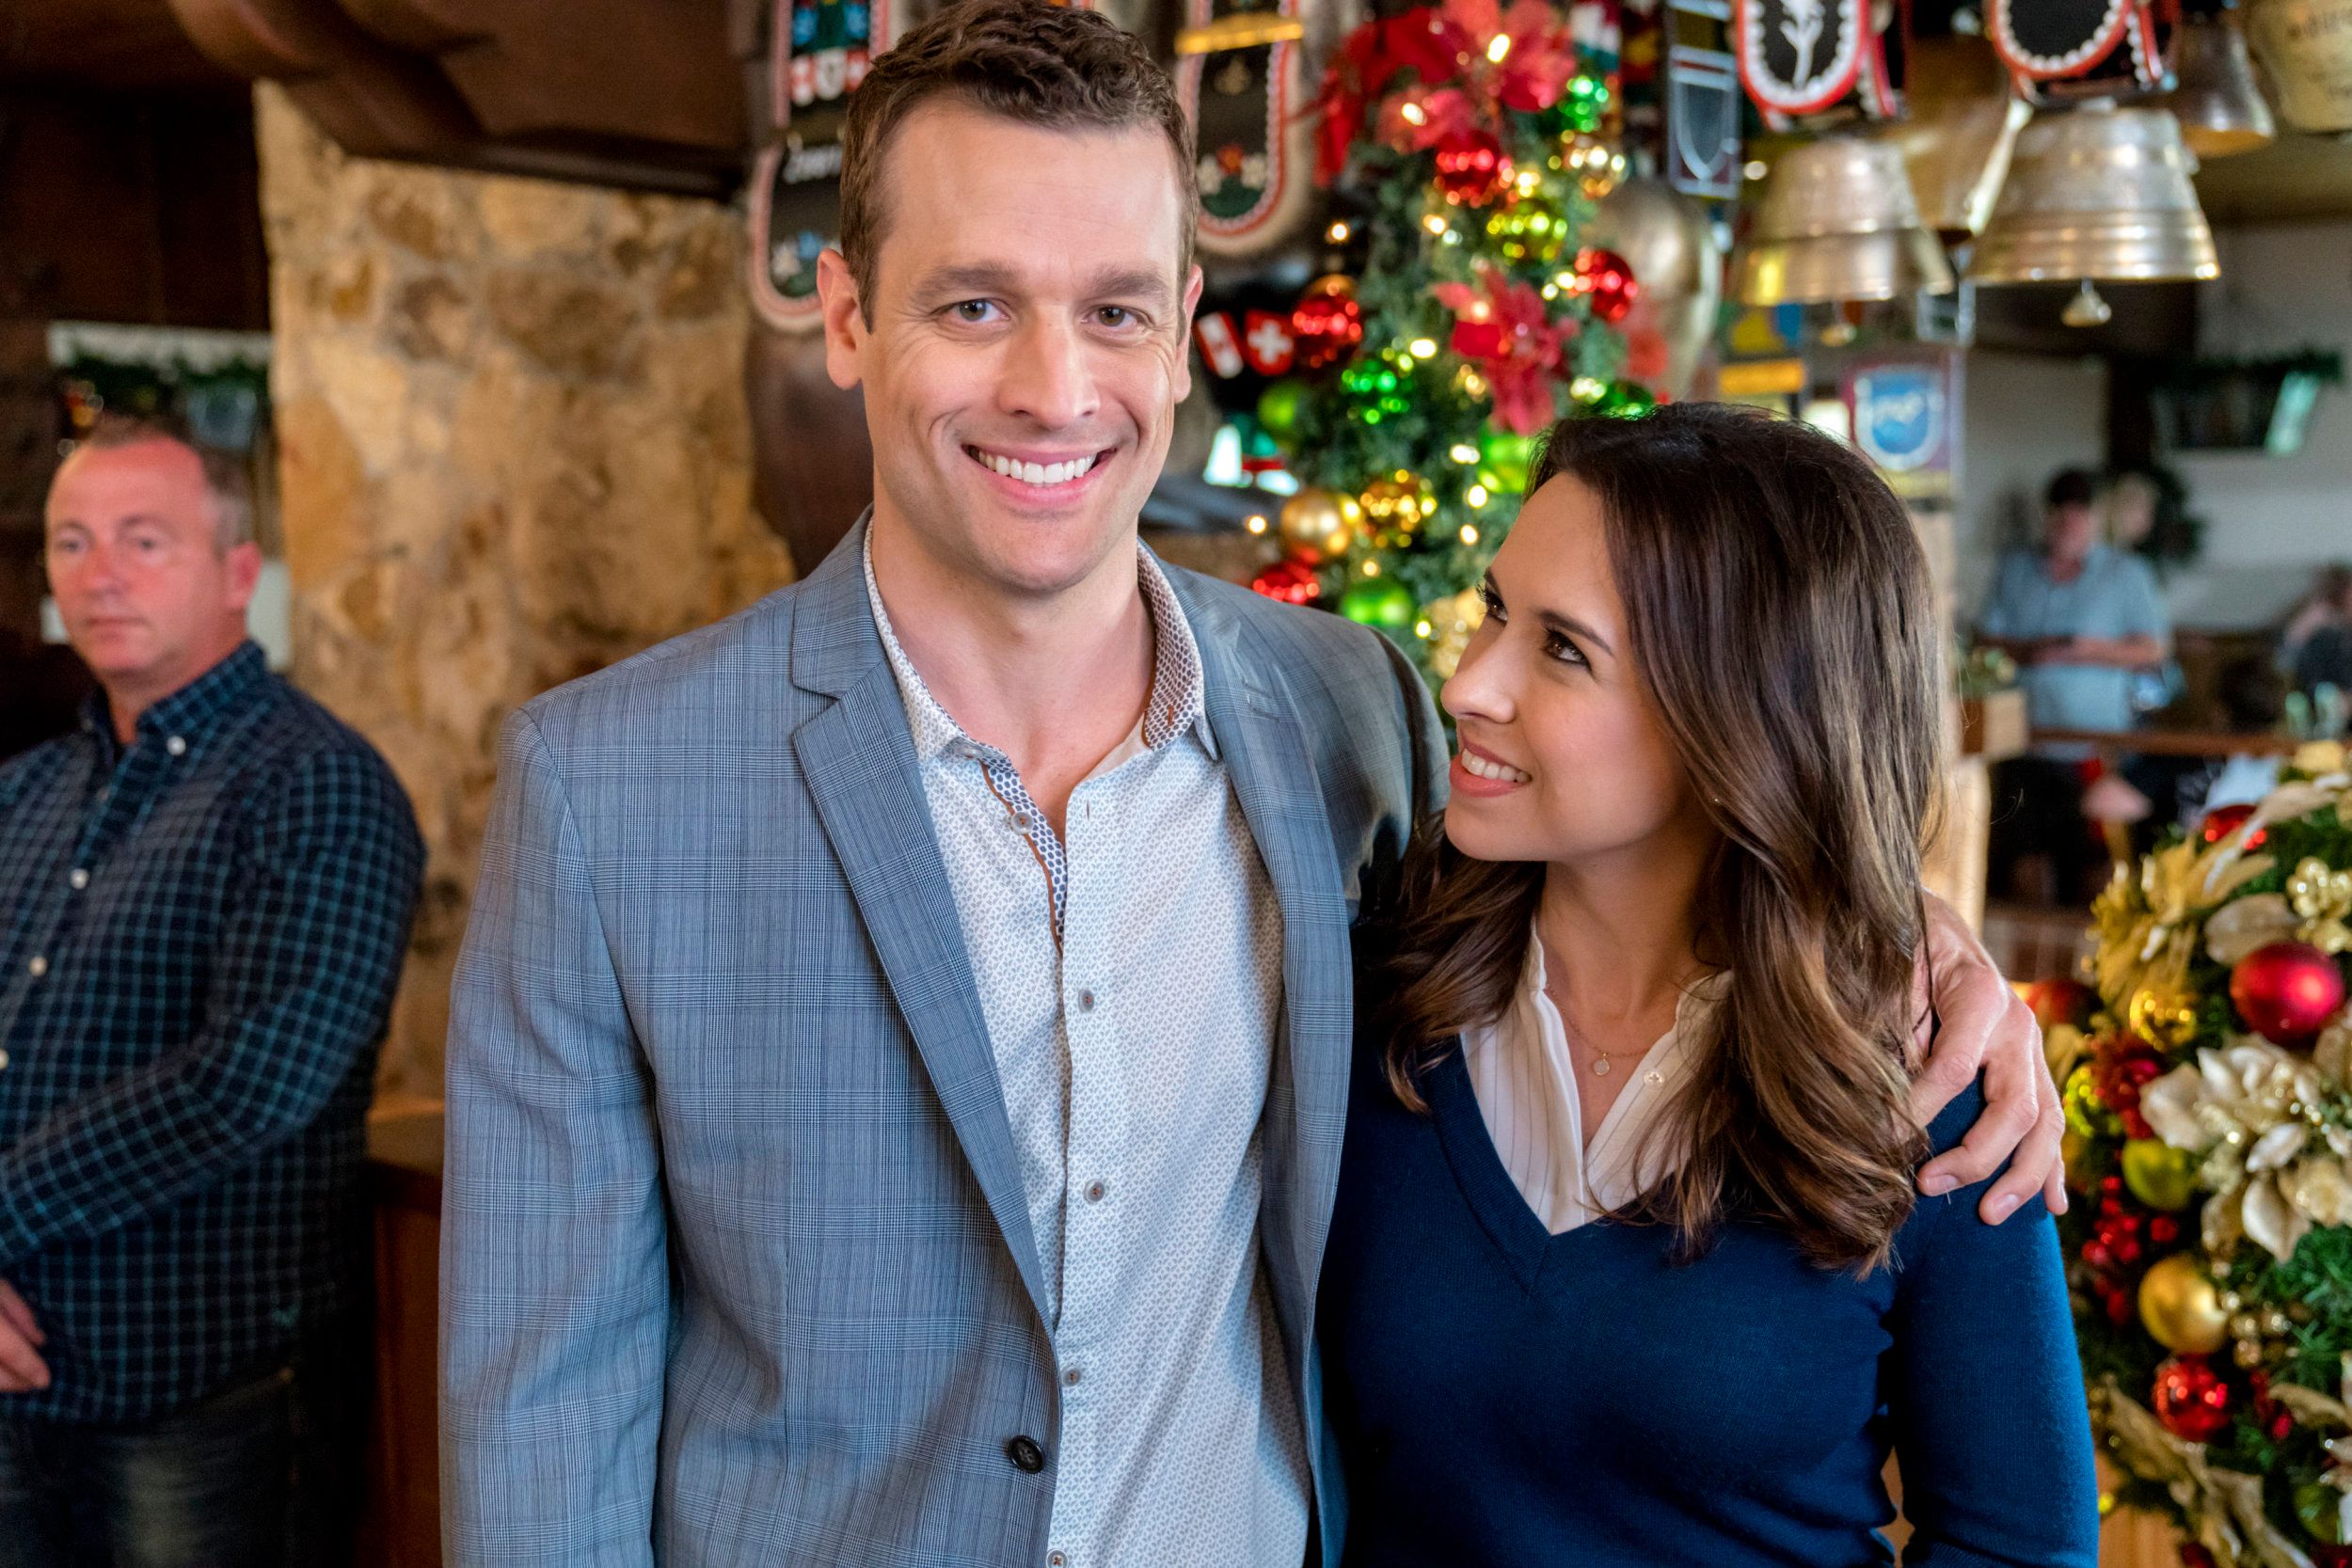 What Hallmark Christmas Movie Should You Watch Based On Your MBTI®